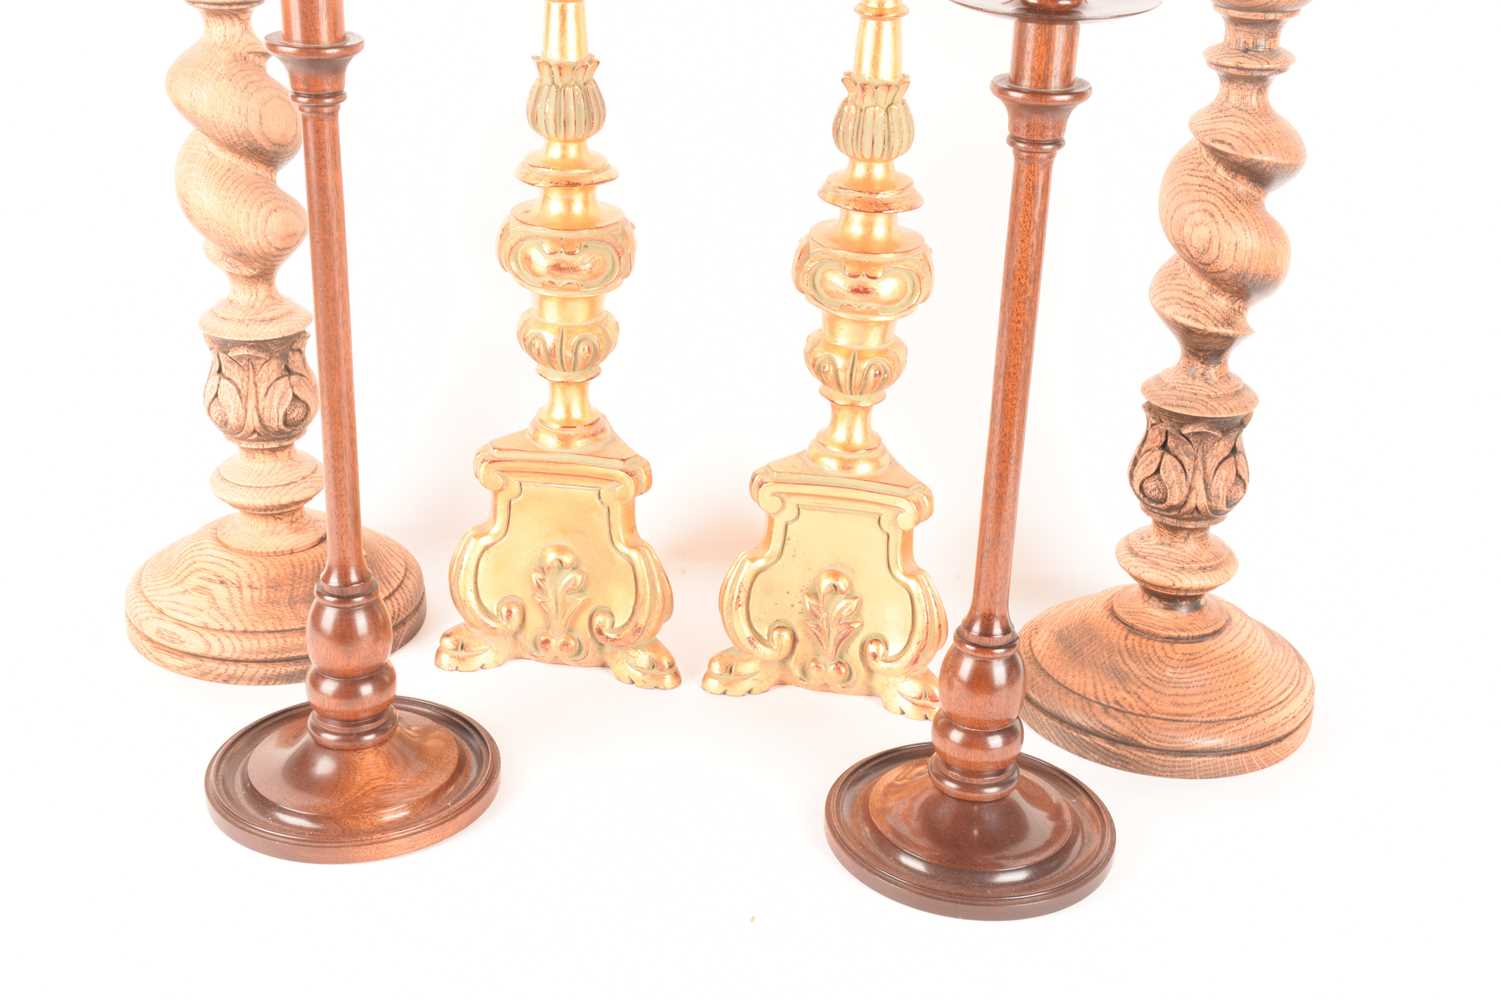 A pair of Mulberry Home oak barley twist and acanthus design candlesticks with Mulberry England labe - Image 3 of 5